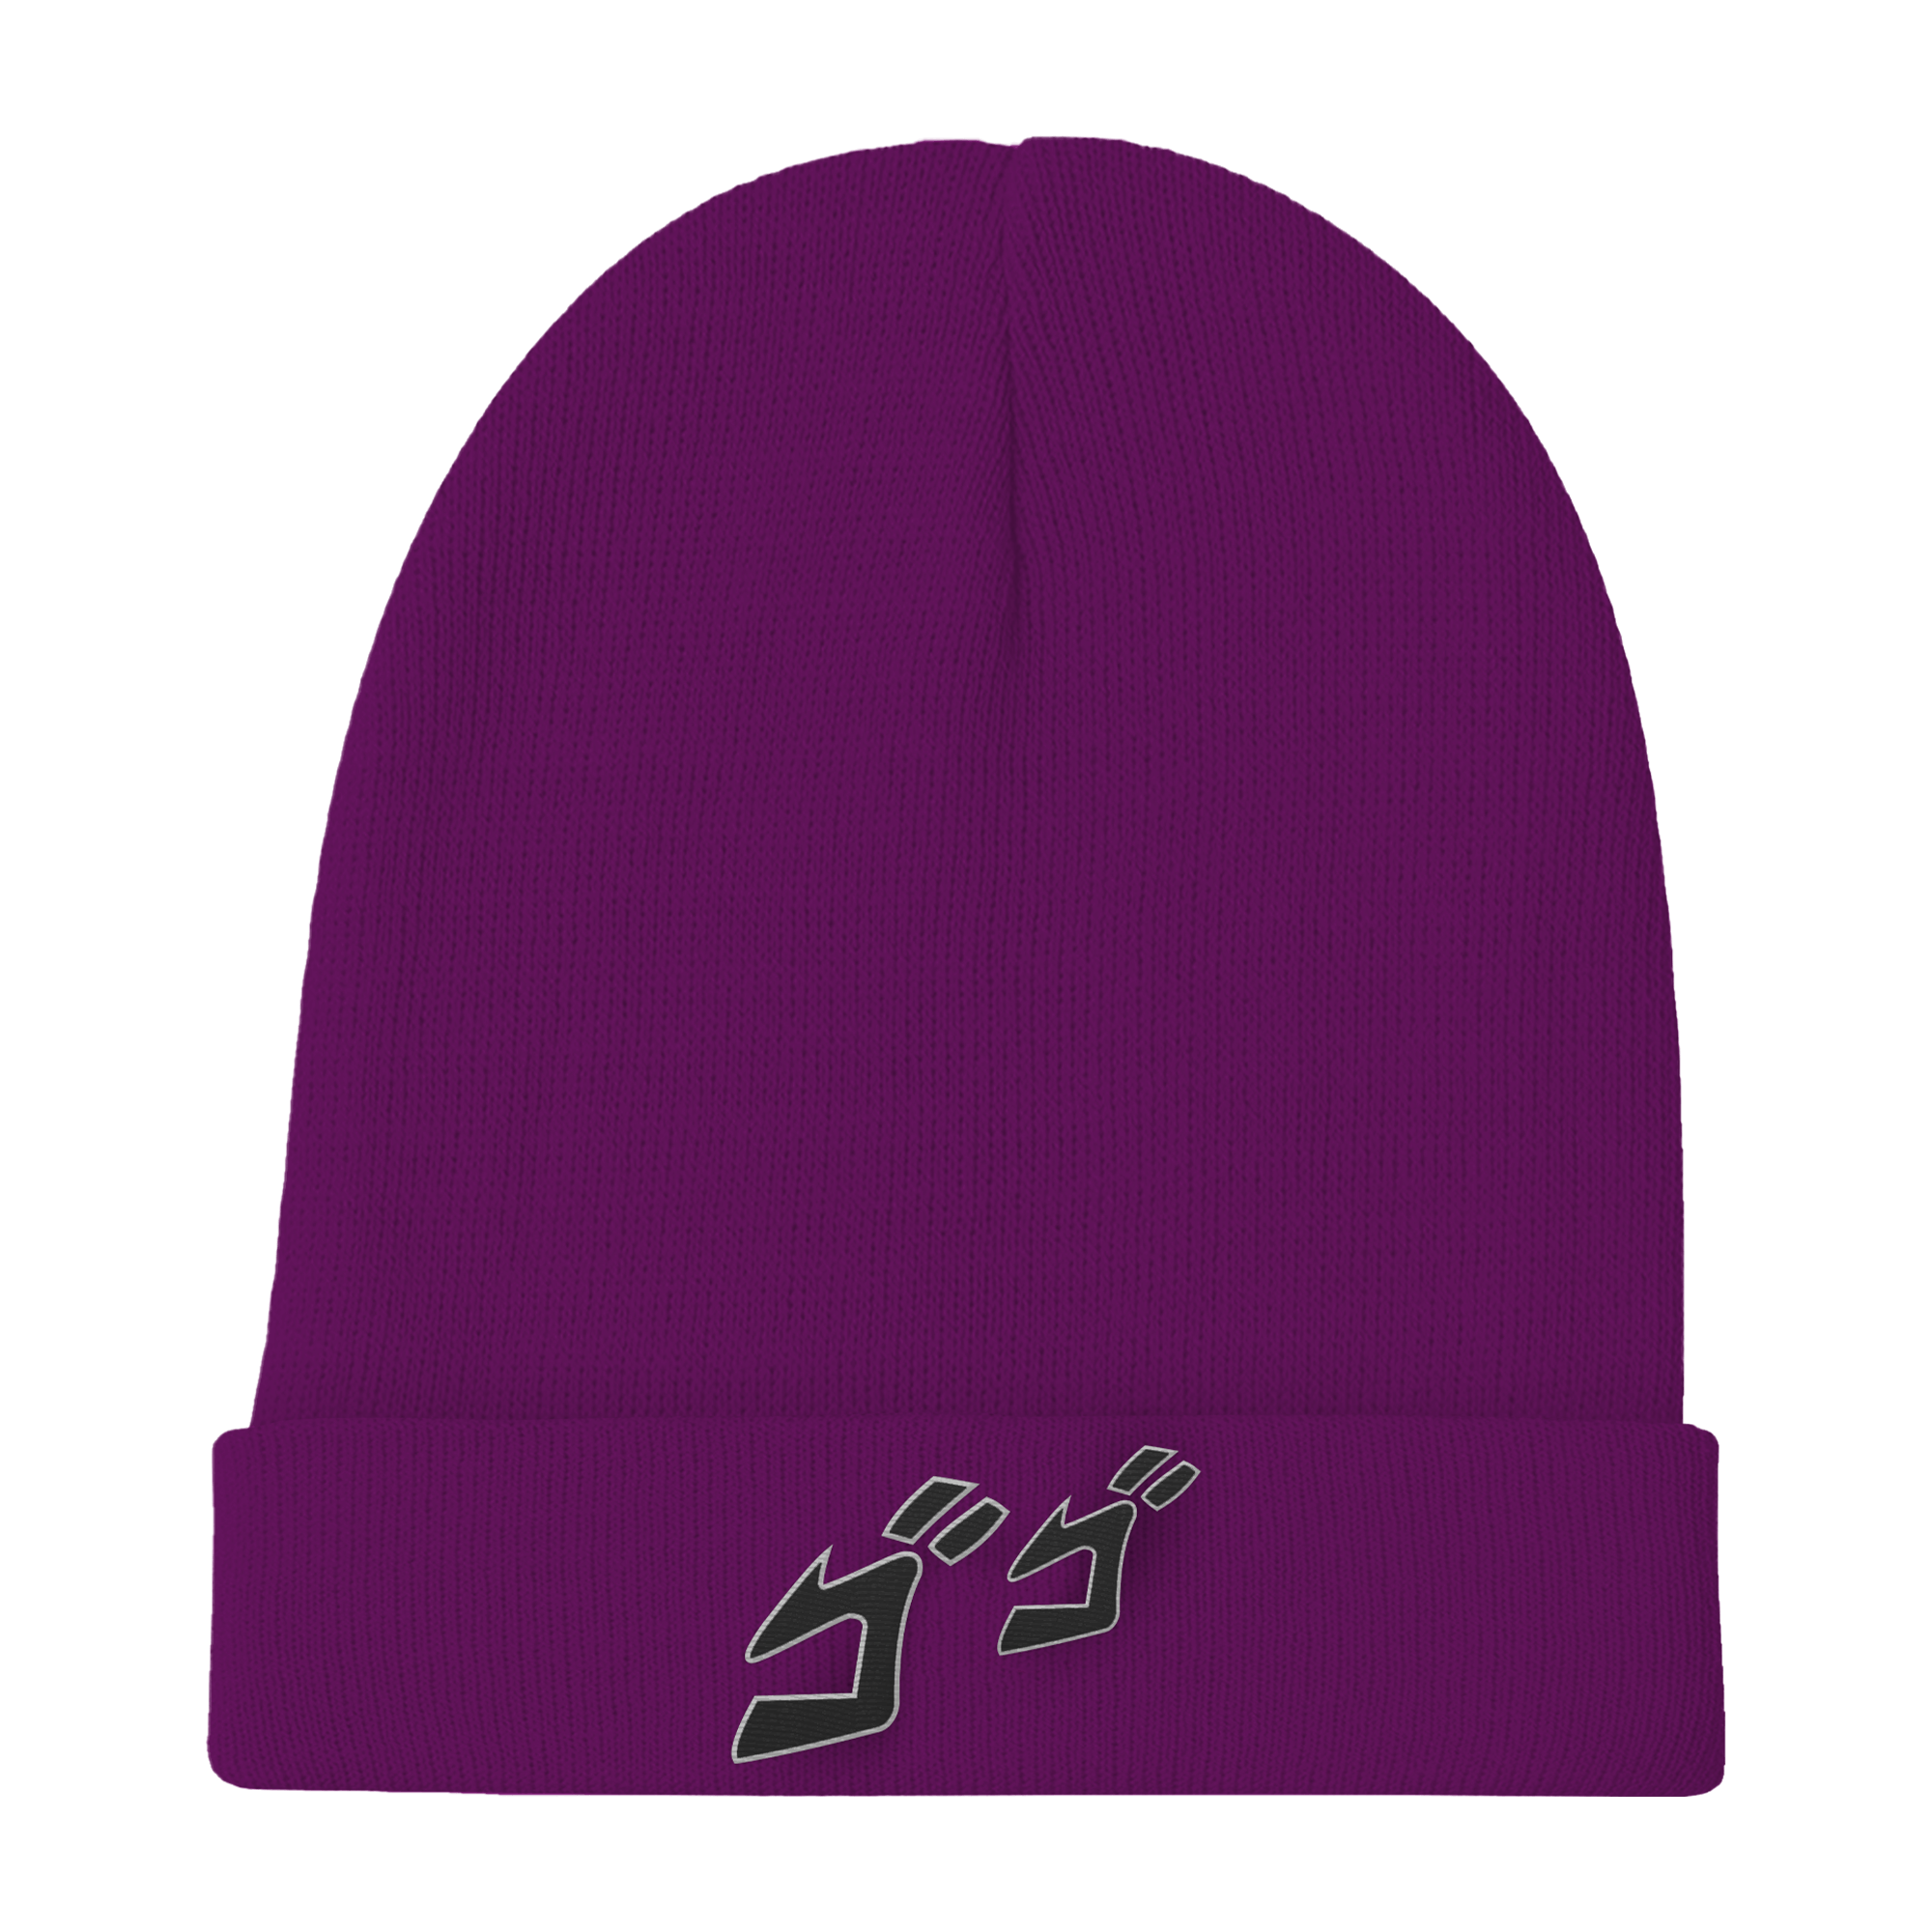 The JOJO Menacing beanie is a purple magenta beanie, with the menacing symbols from jojo embroidered on it. The beanie itself is made from 100% Soft-Touch Acrylic ( 55% Polyester/45% Acrylic). Pretty Nerdy.